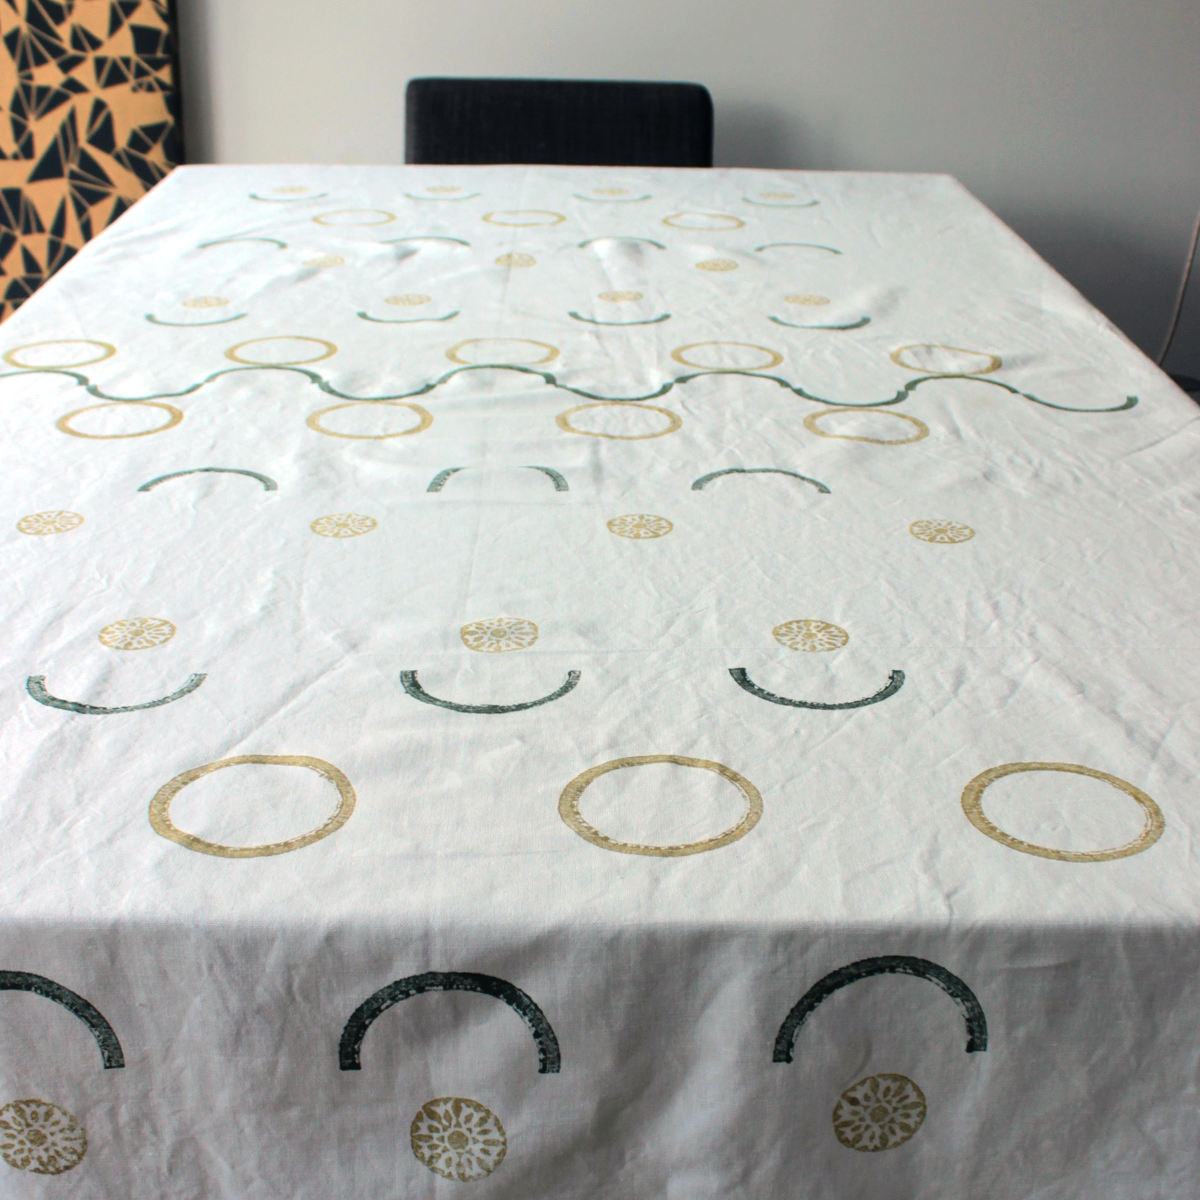 Heritage-Inspired Circle Printed Tablecloth: A Sustainable Addition to Your Table Setting